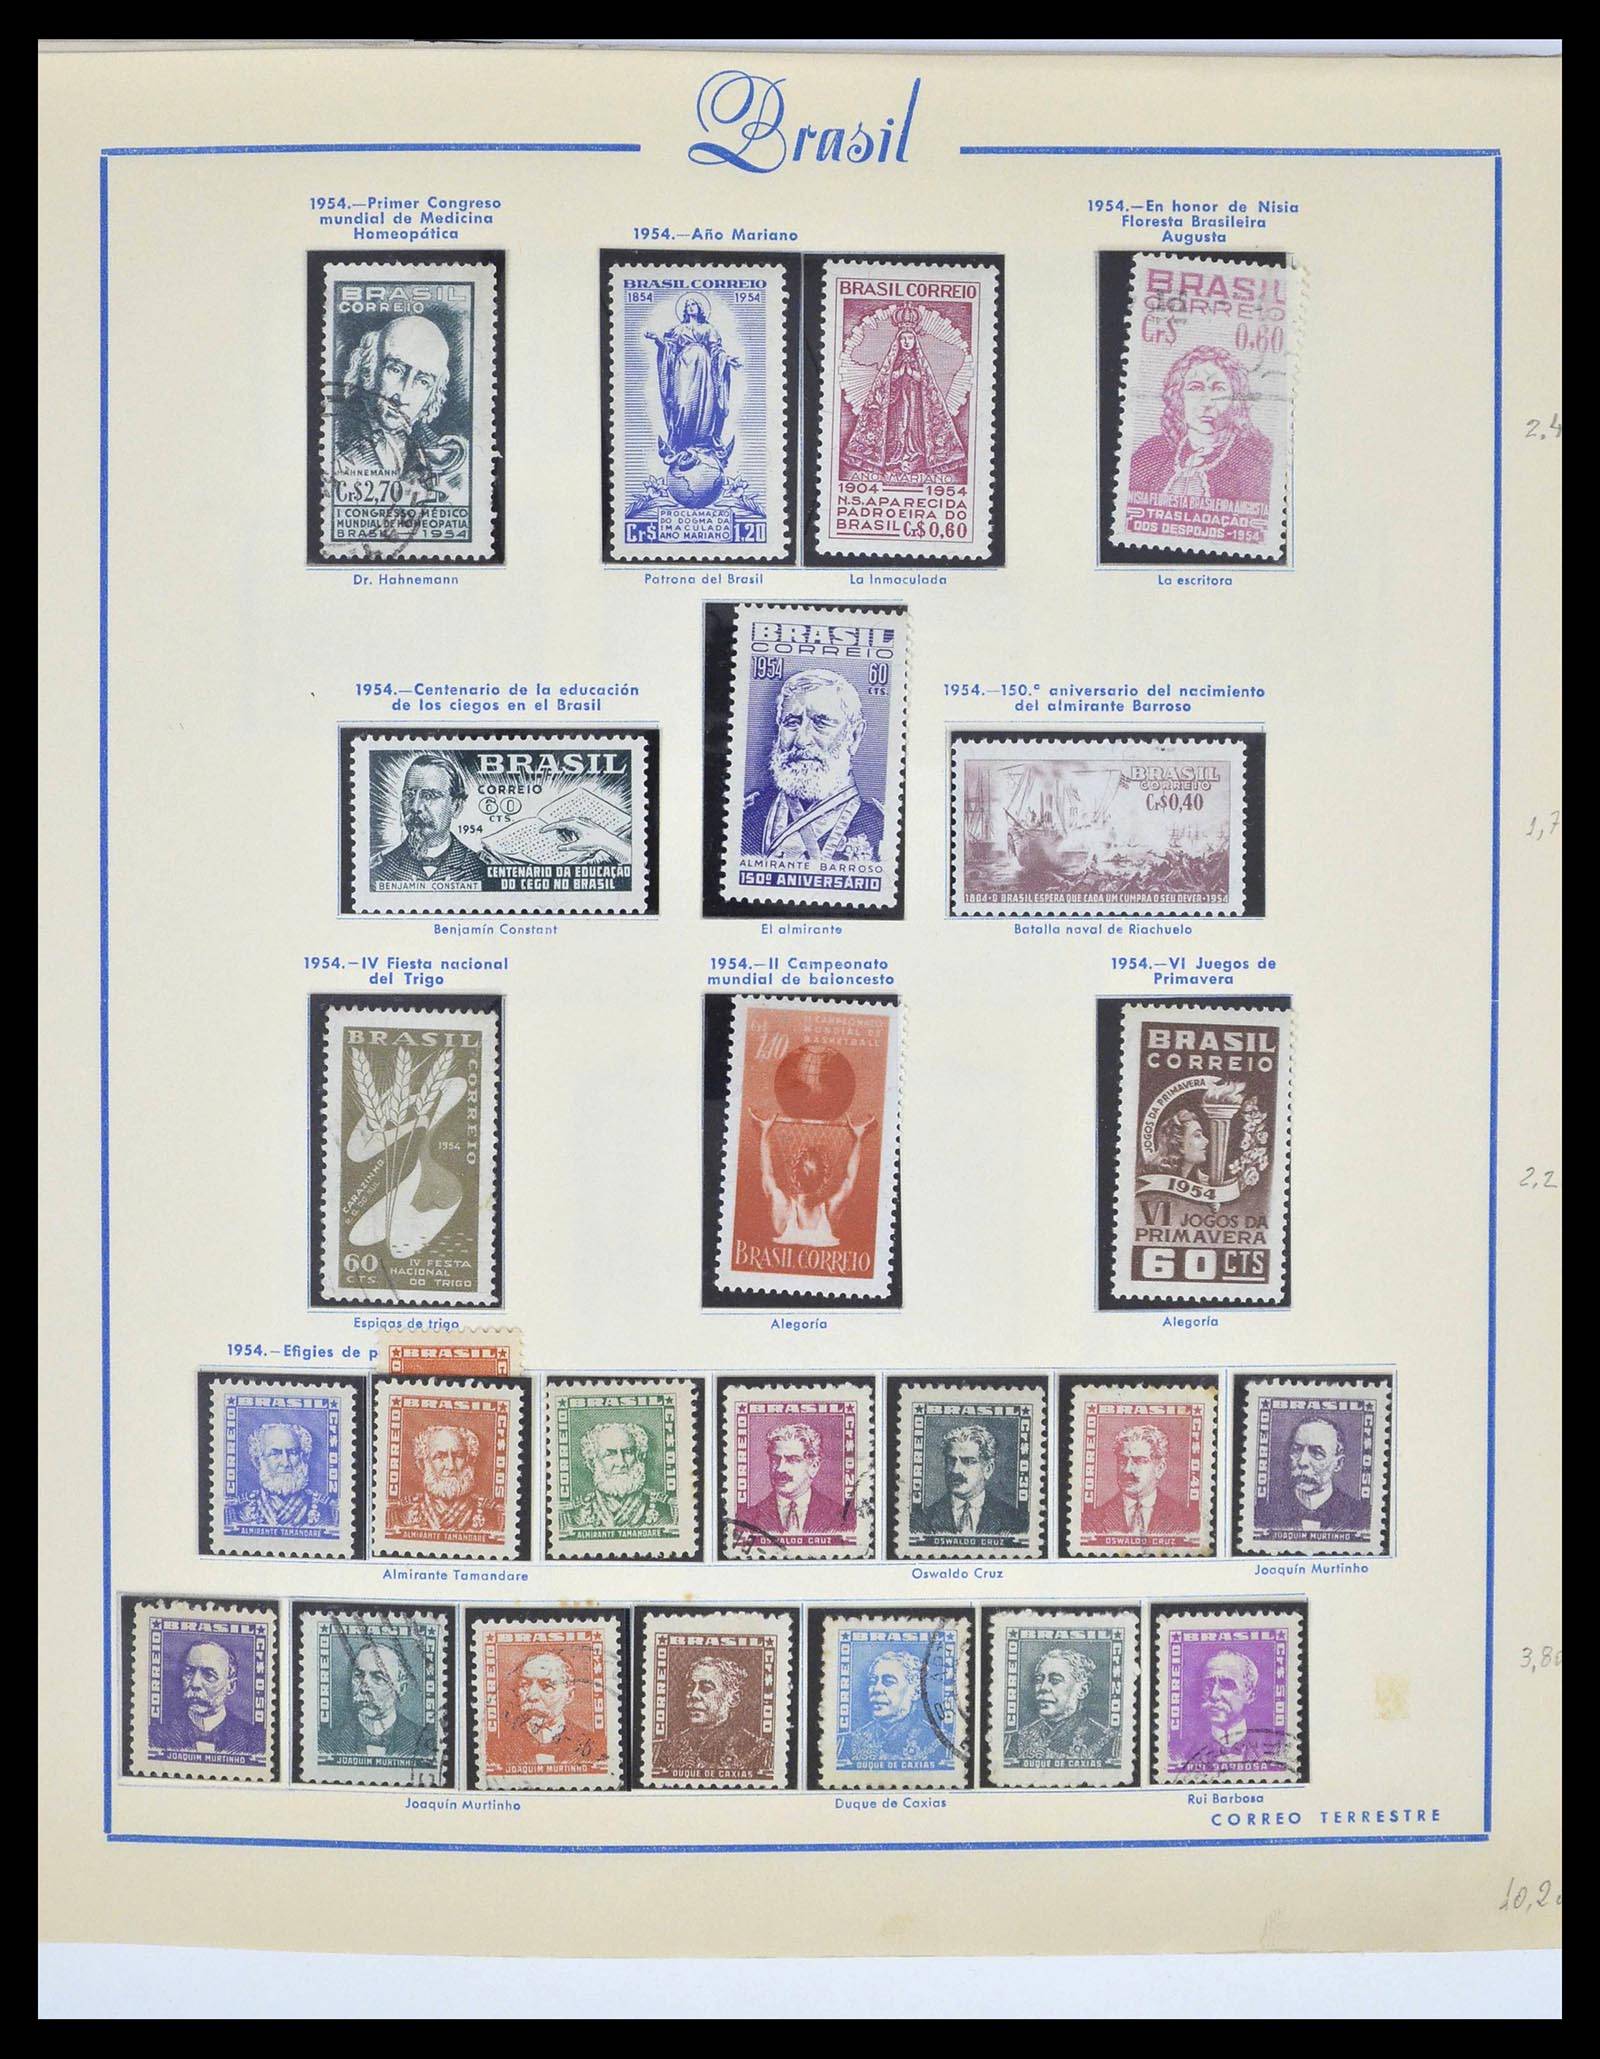 39245 0037 - Stamp collection 39245 Brazil 1843-1968.